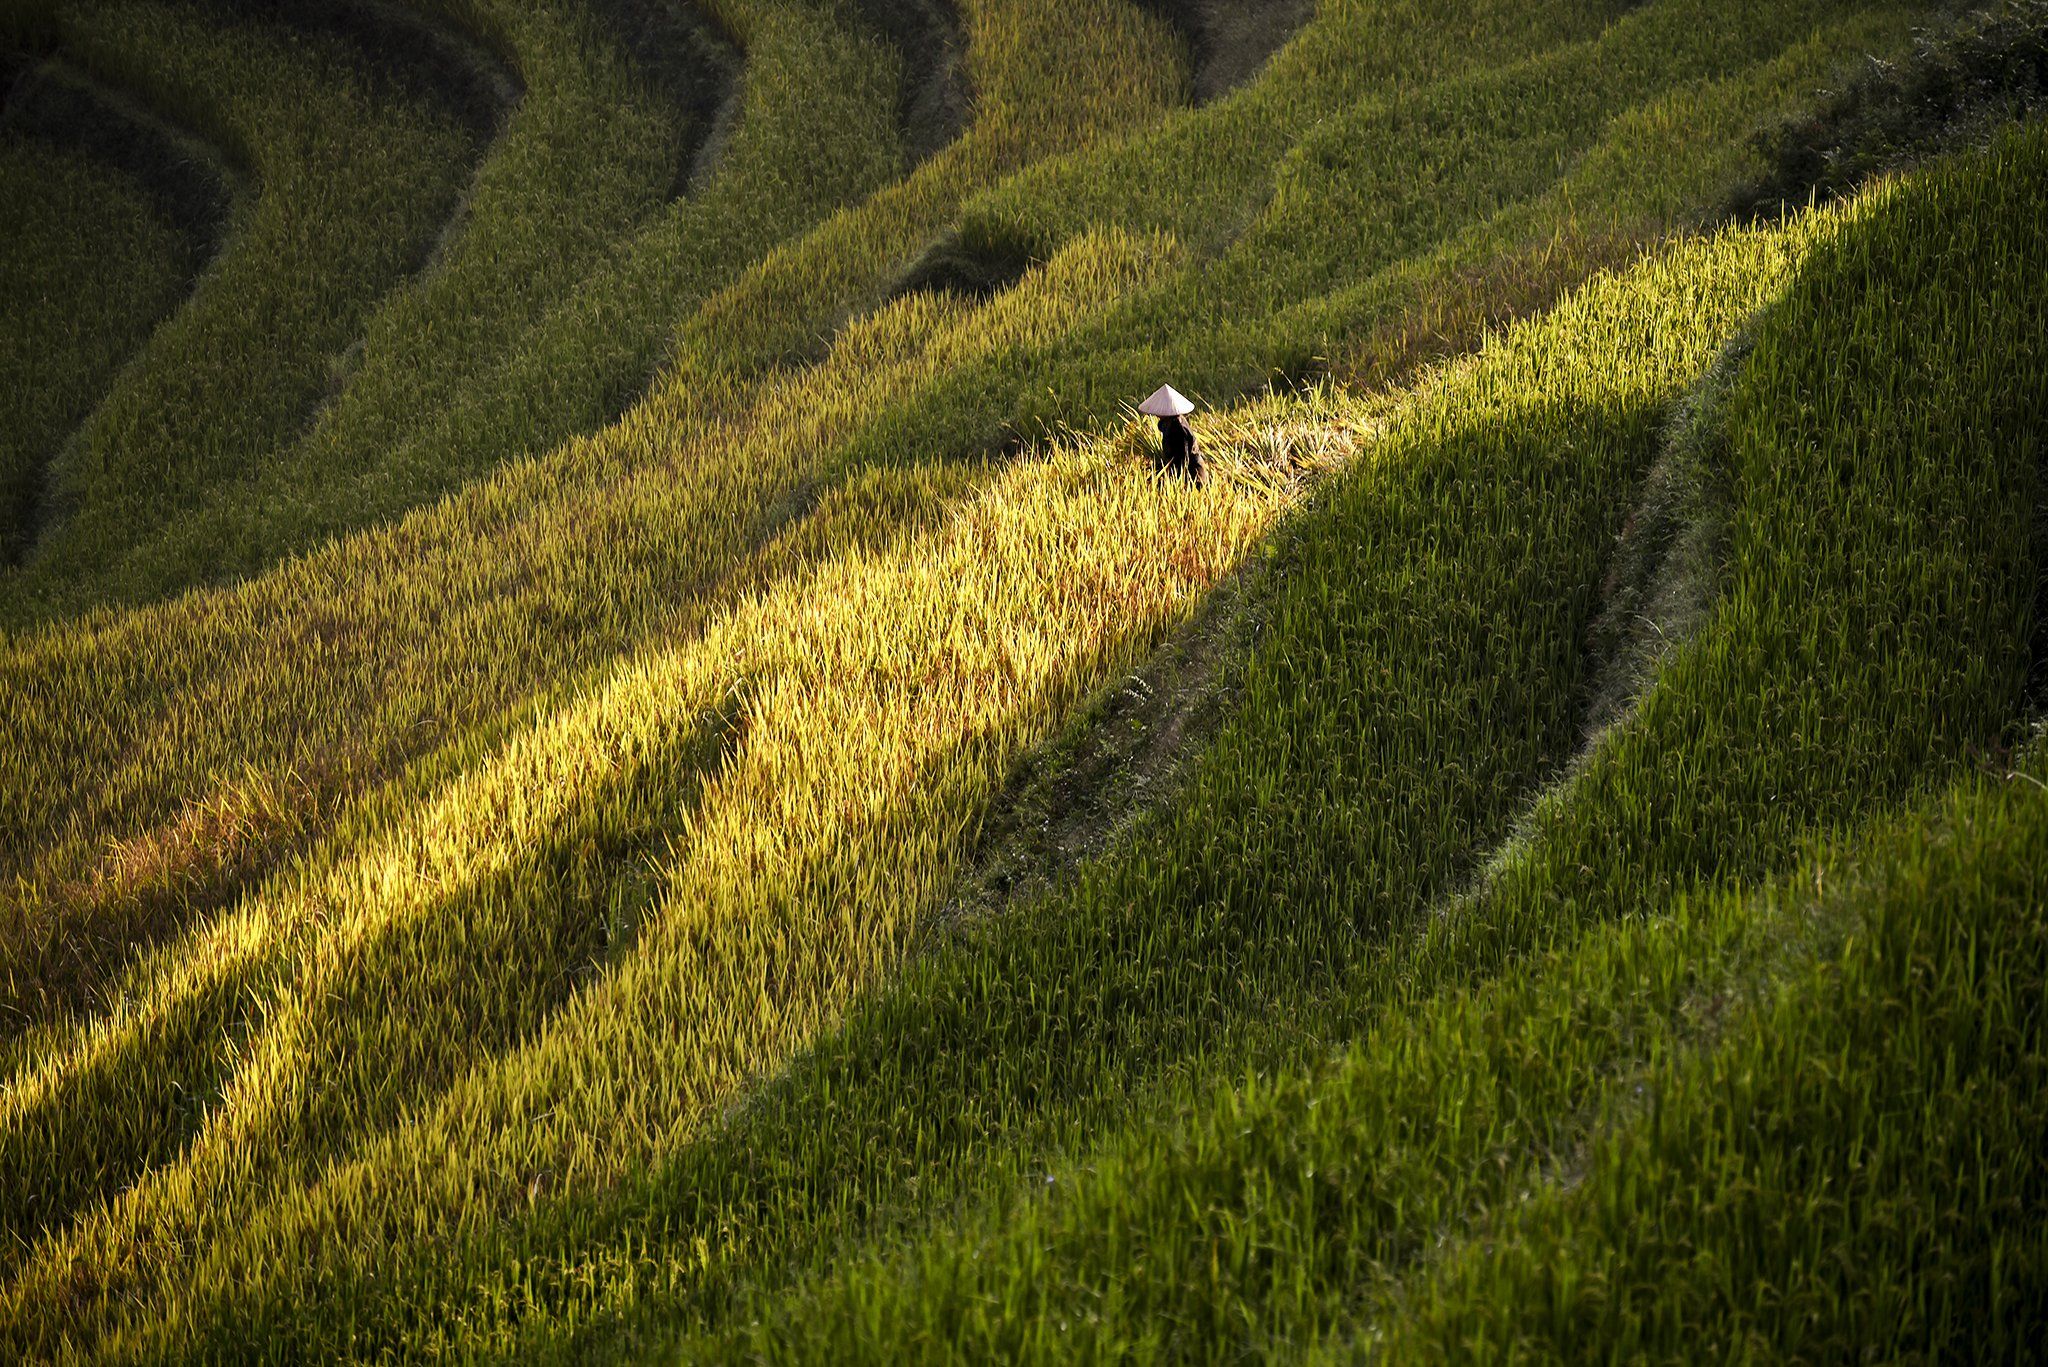 Asia, Asian, Farmer, Field, Green, Landscape, Photography, Rice, Terraces rice field, Yellow, Saravut Whanset